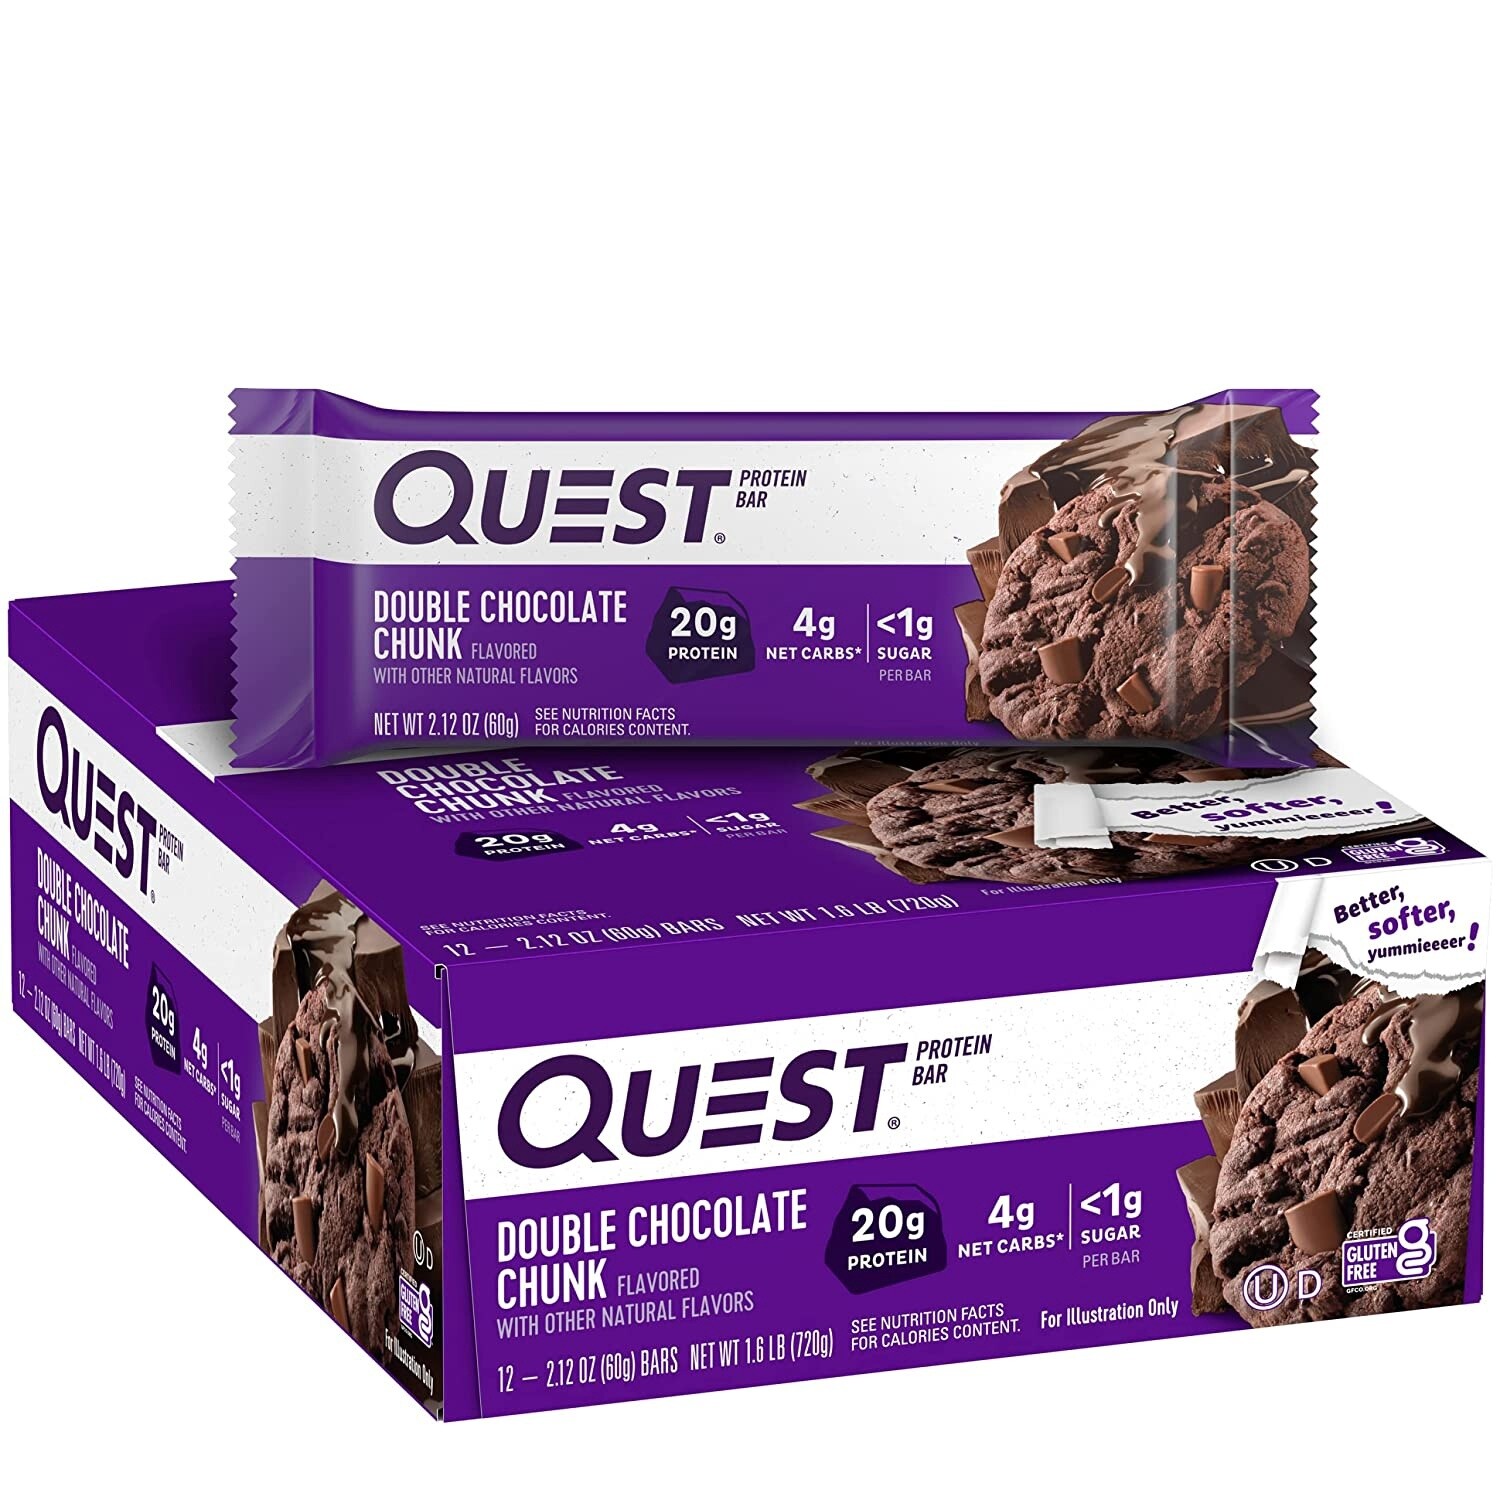 QUEST Protein Bar (60g) - Double Chocolate Chunk -  (12 Bars/Box)  *Expire Date :  19/10/23*